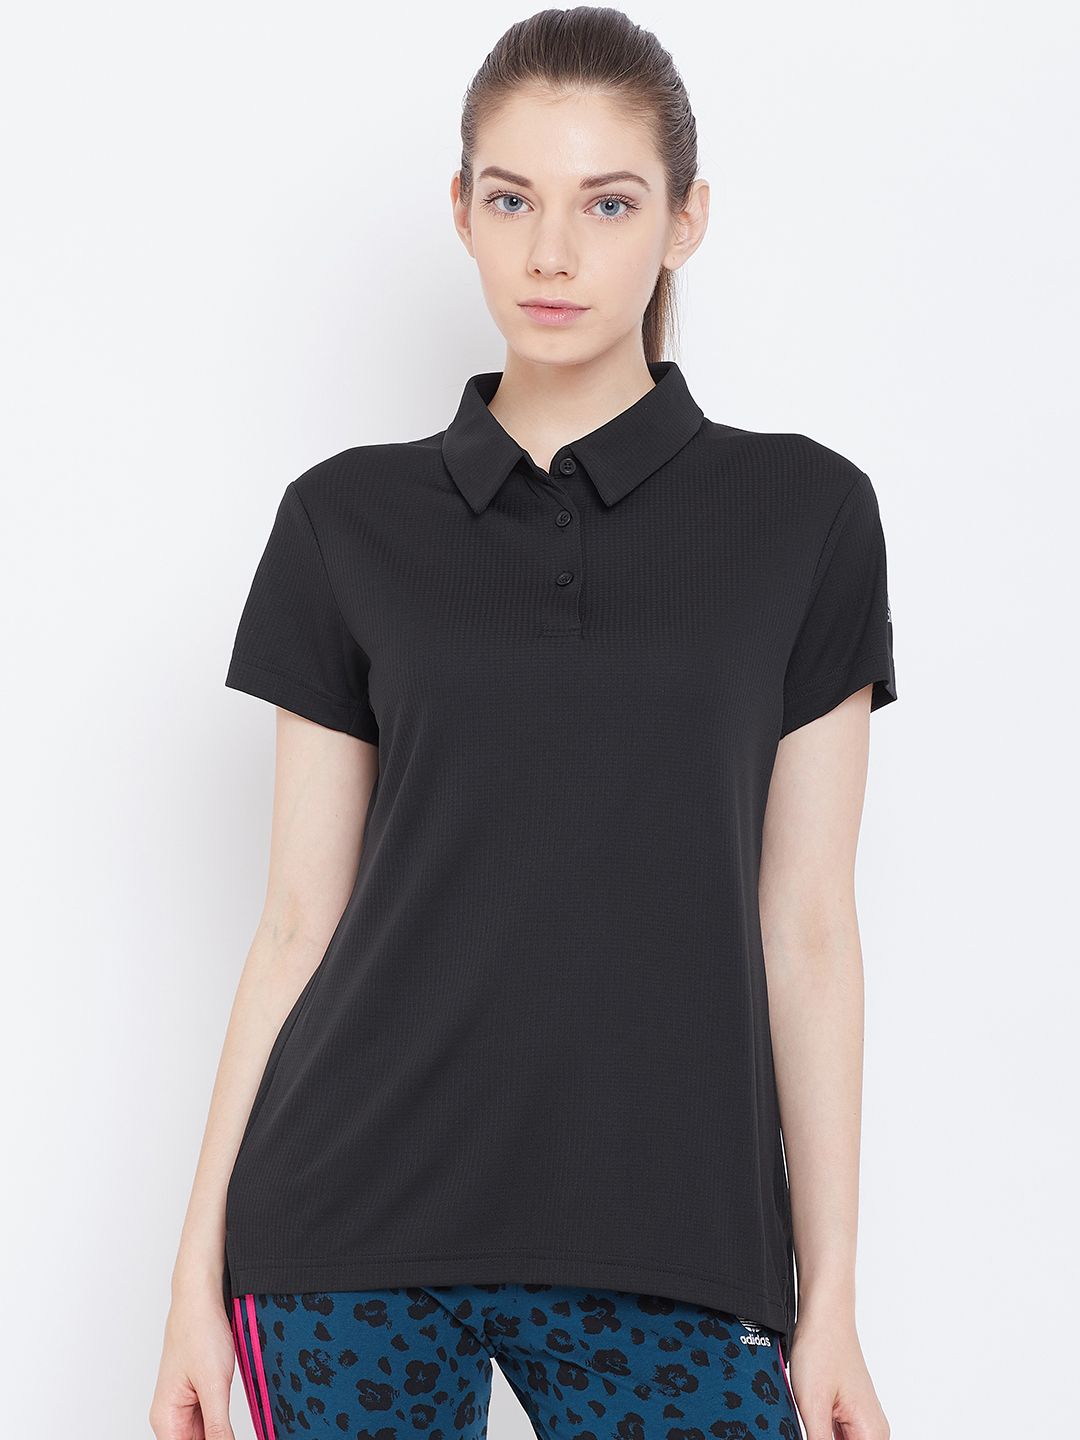 ADIDAS Women Black Climachill Self-Checked Polo Tennis T-Shirt Price in India